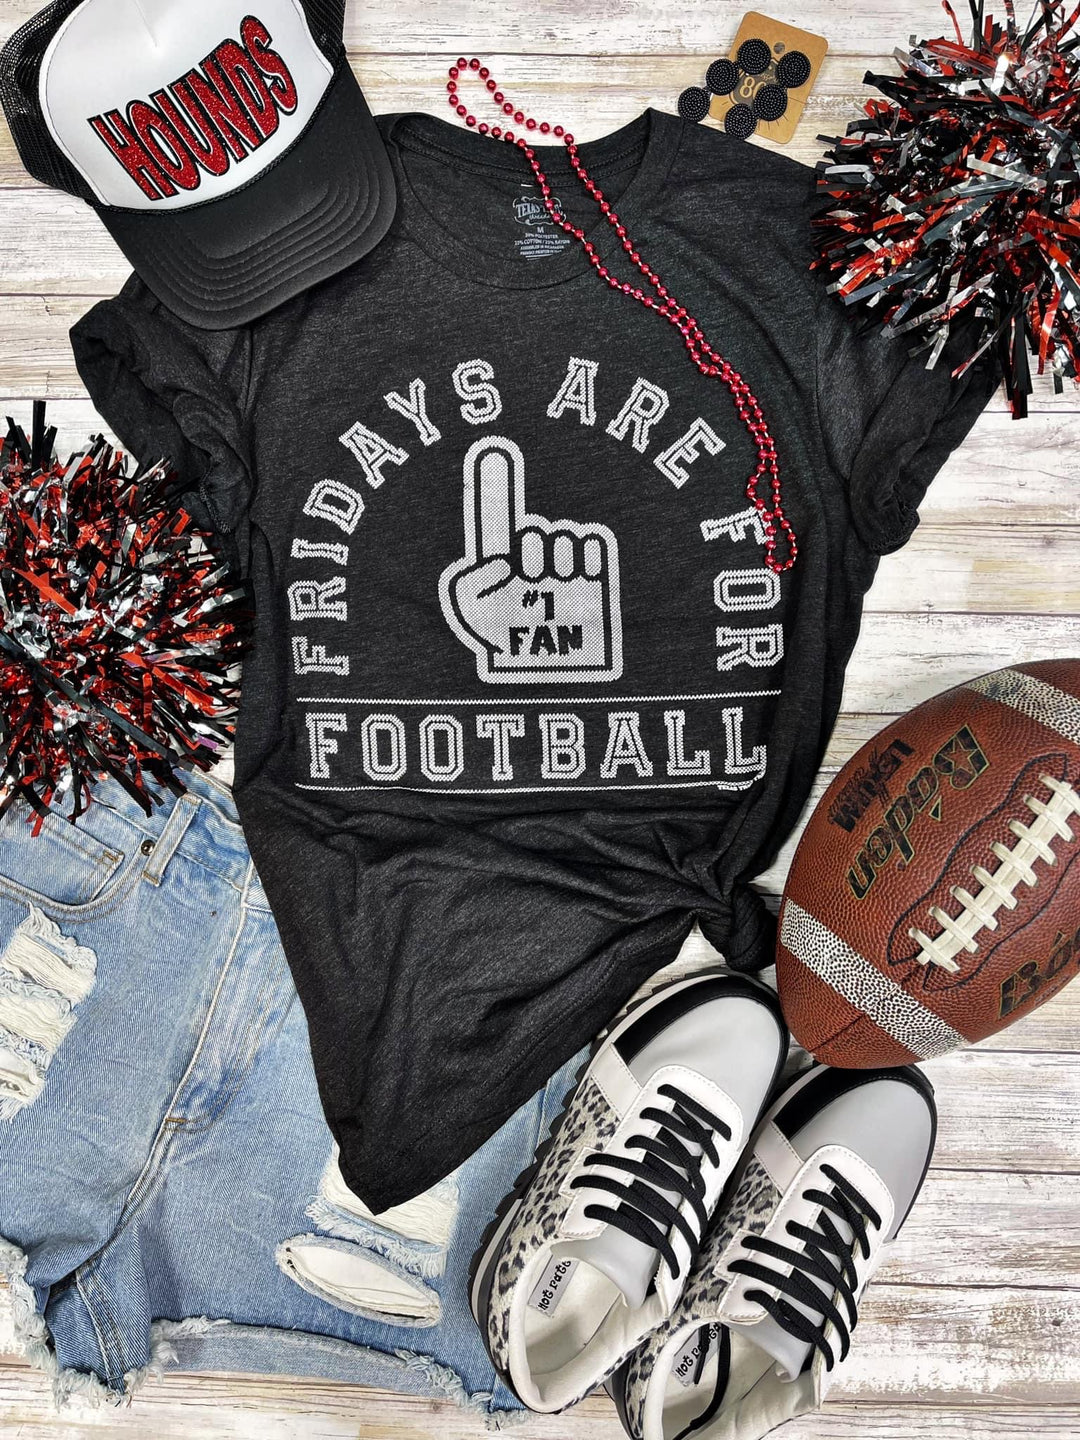 Fridays Are For Football Charblack Tee by Texas True Threads